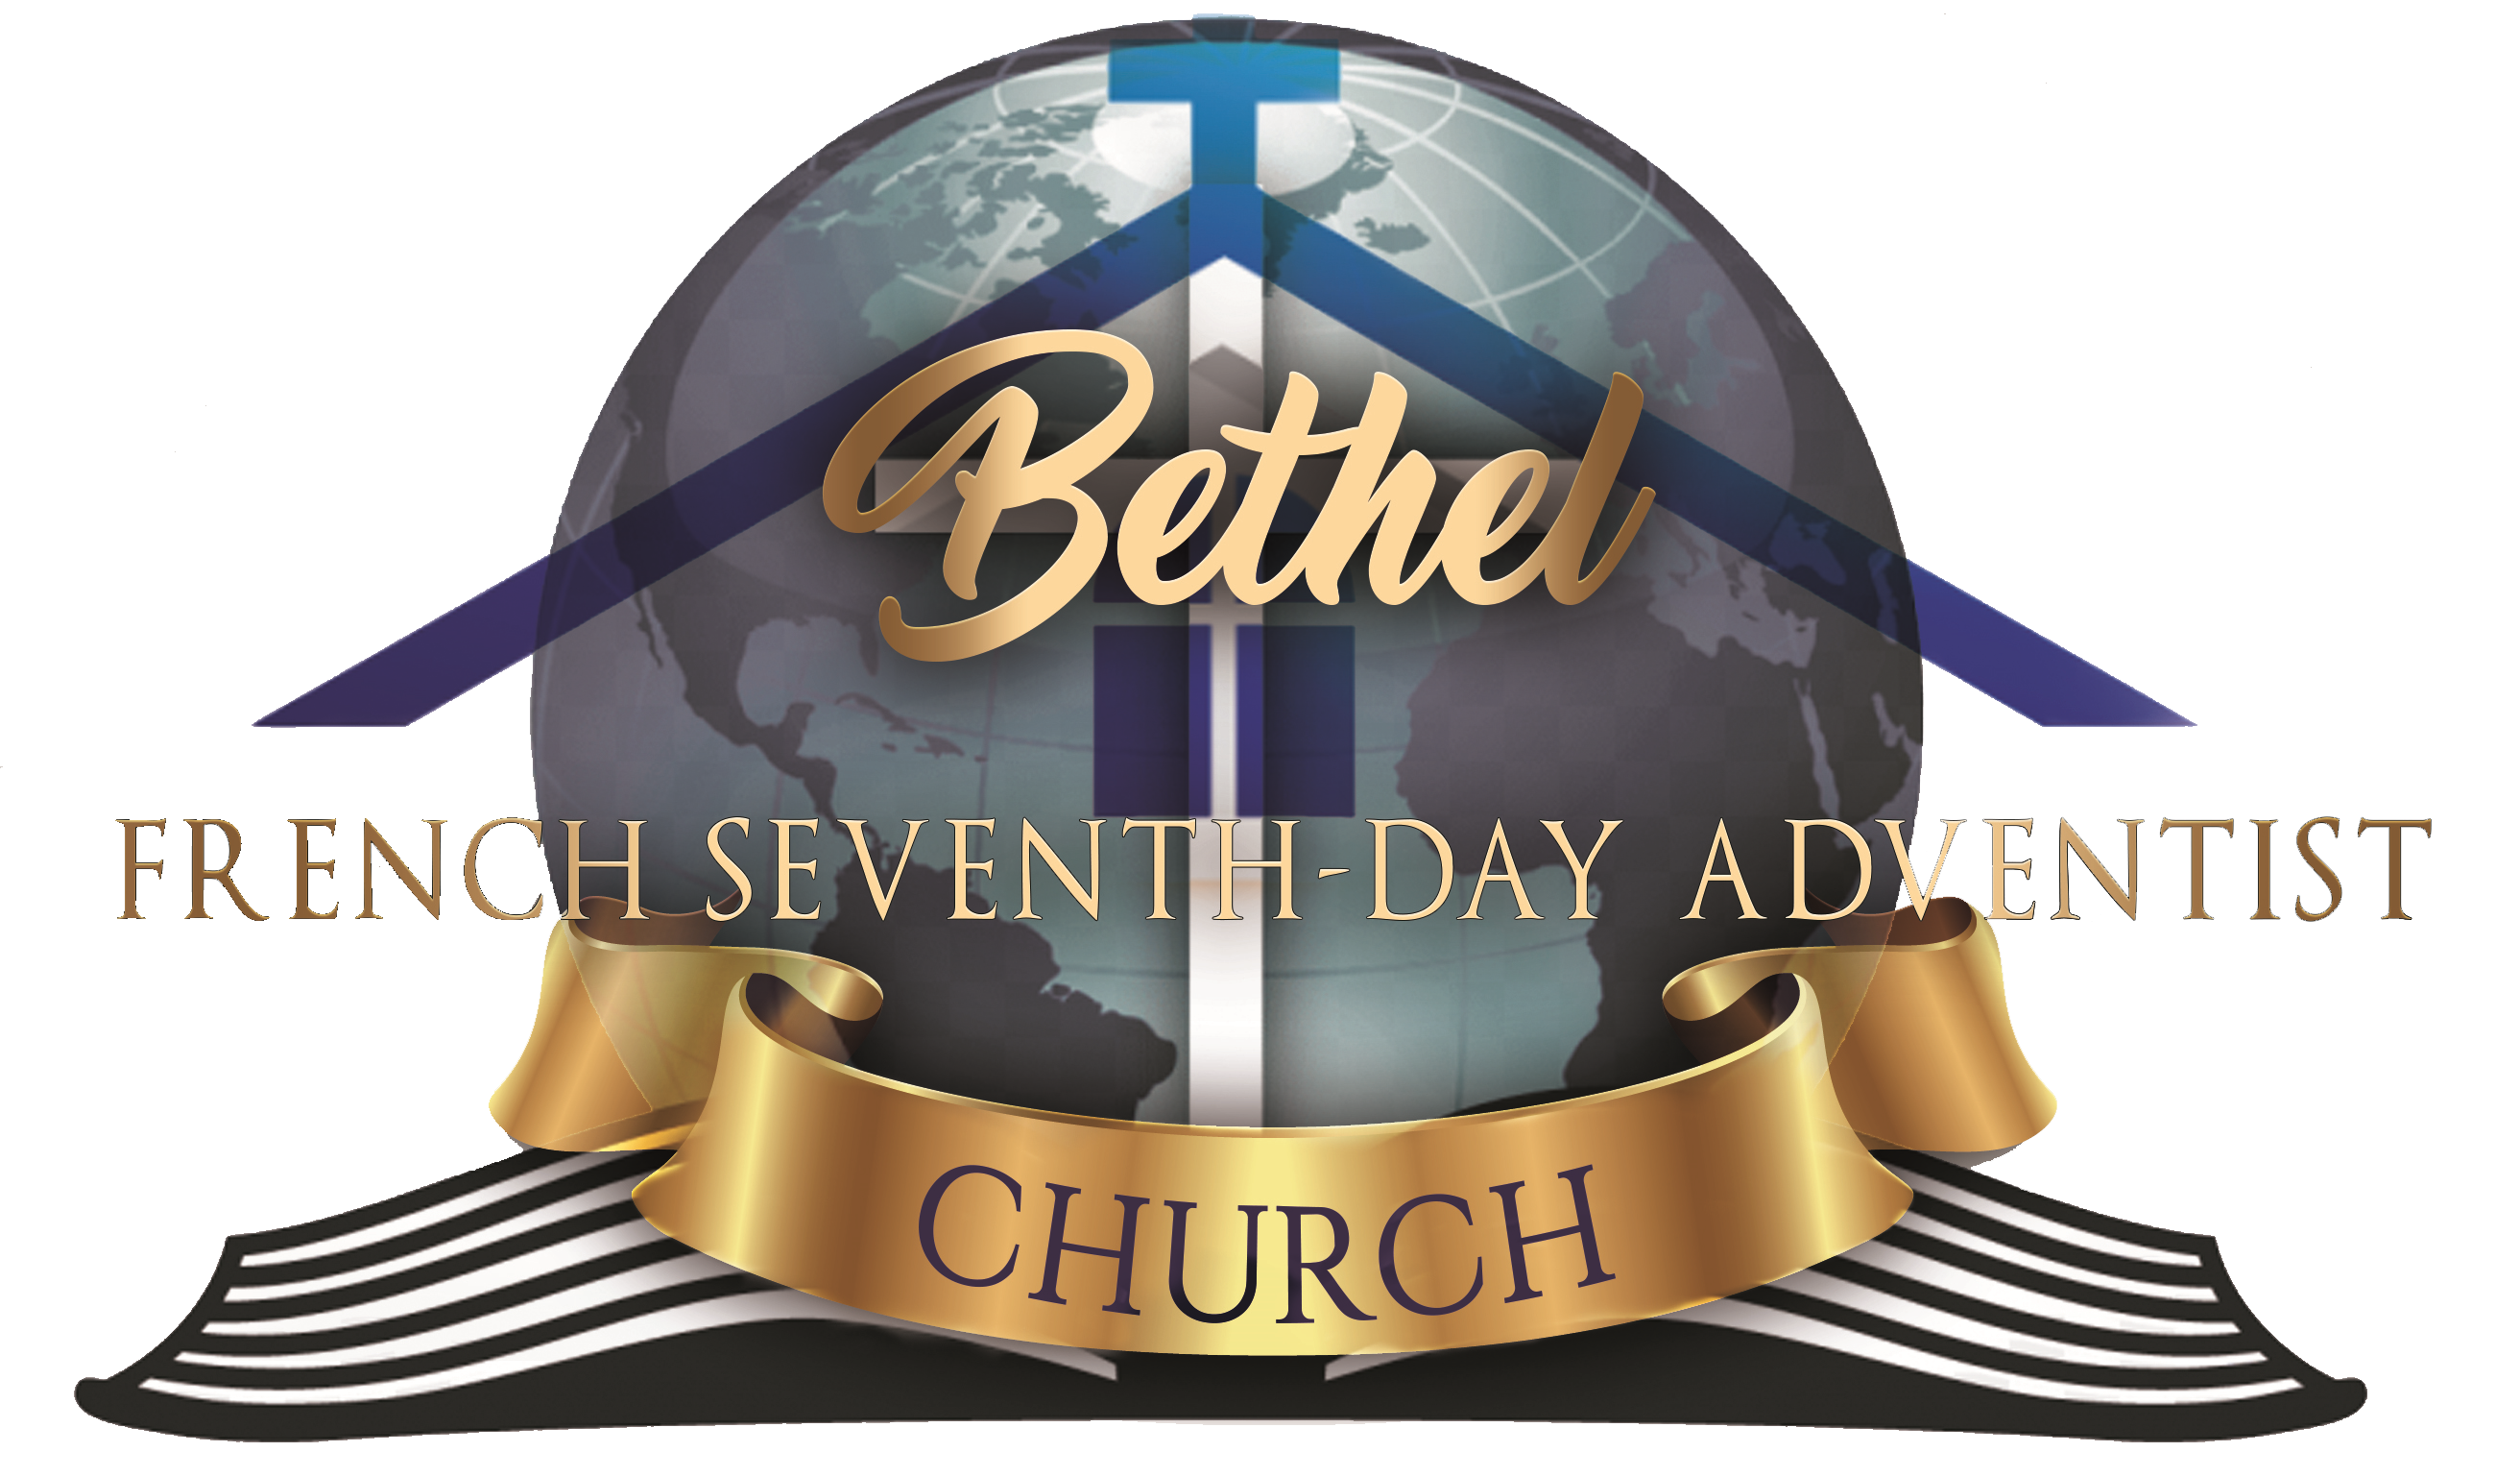 Upcoming Events Bethel French Seventh Day Adventist Church